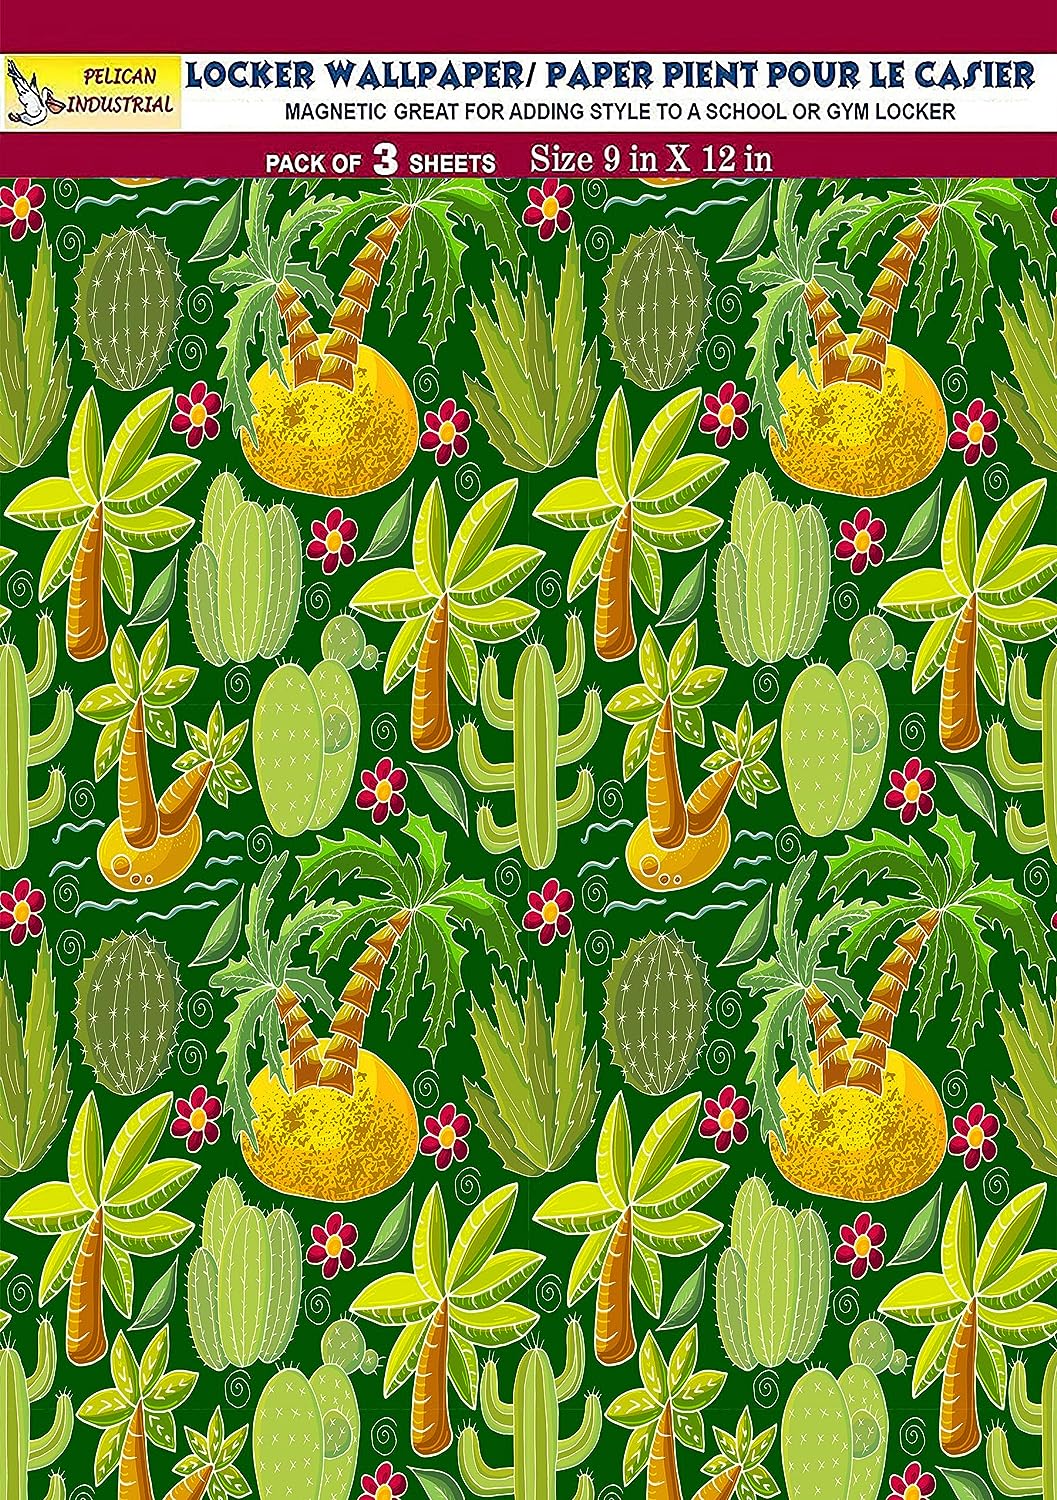 PELICAN INDUSTRIAL Magnetic Locker Wallpaper (Full Sheet Magnetic) - Remove & Reuse Decorative Vinyl - Made in USA - Fade, Tear and Water Resistant - (Tropical Leaves) - Pack of 3 Sheets (vb052)